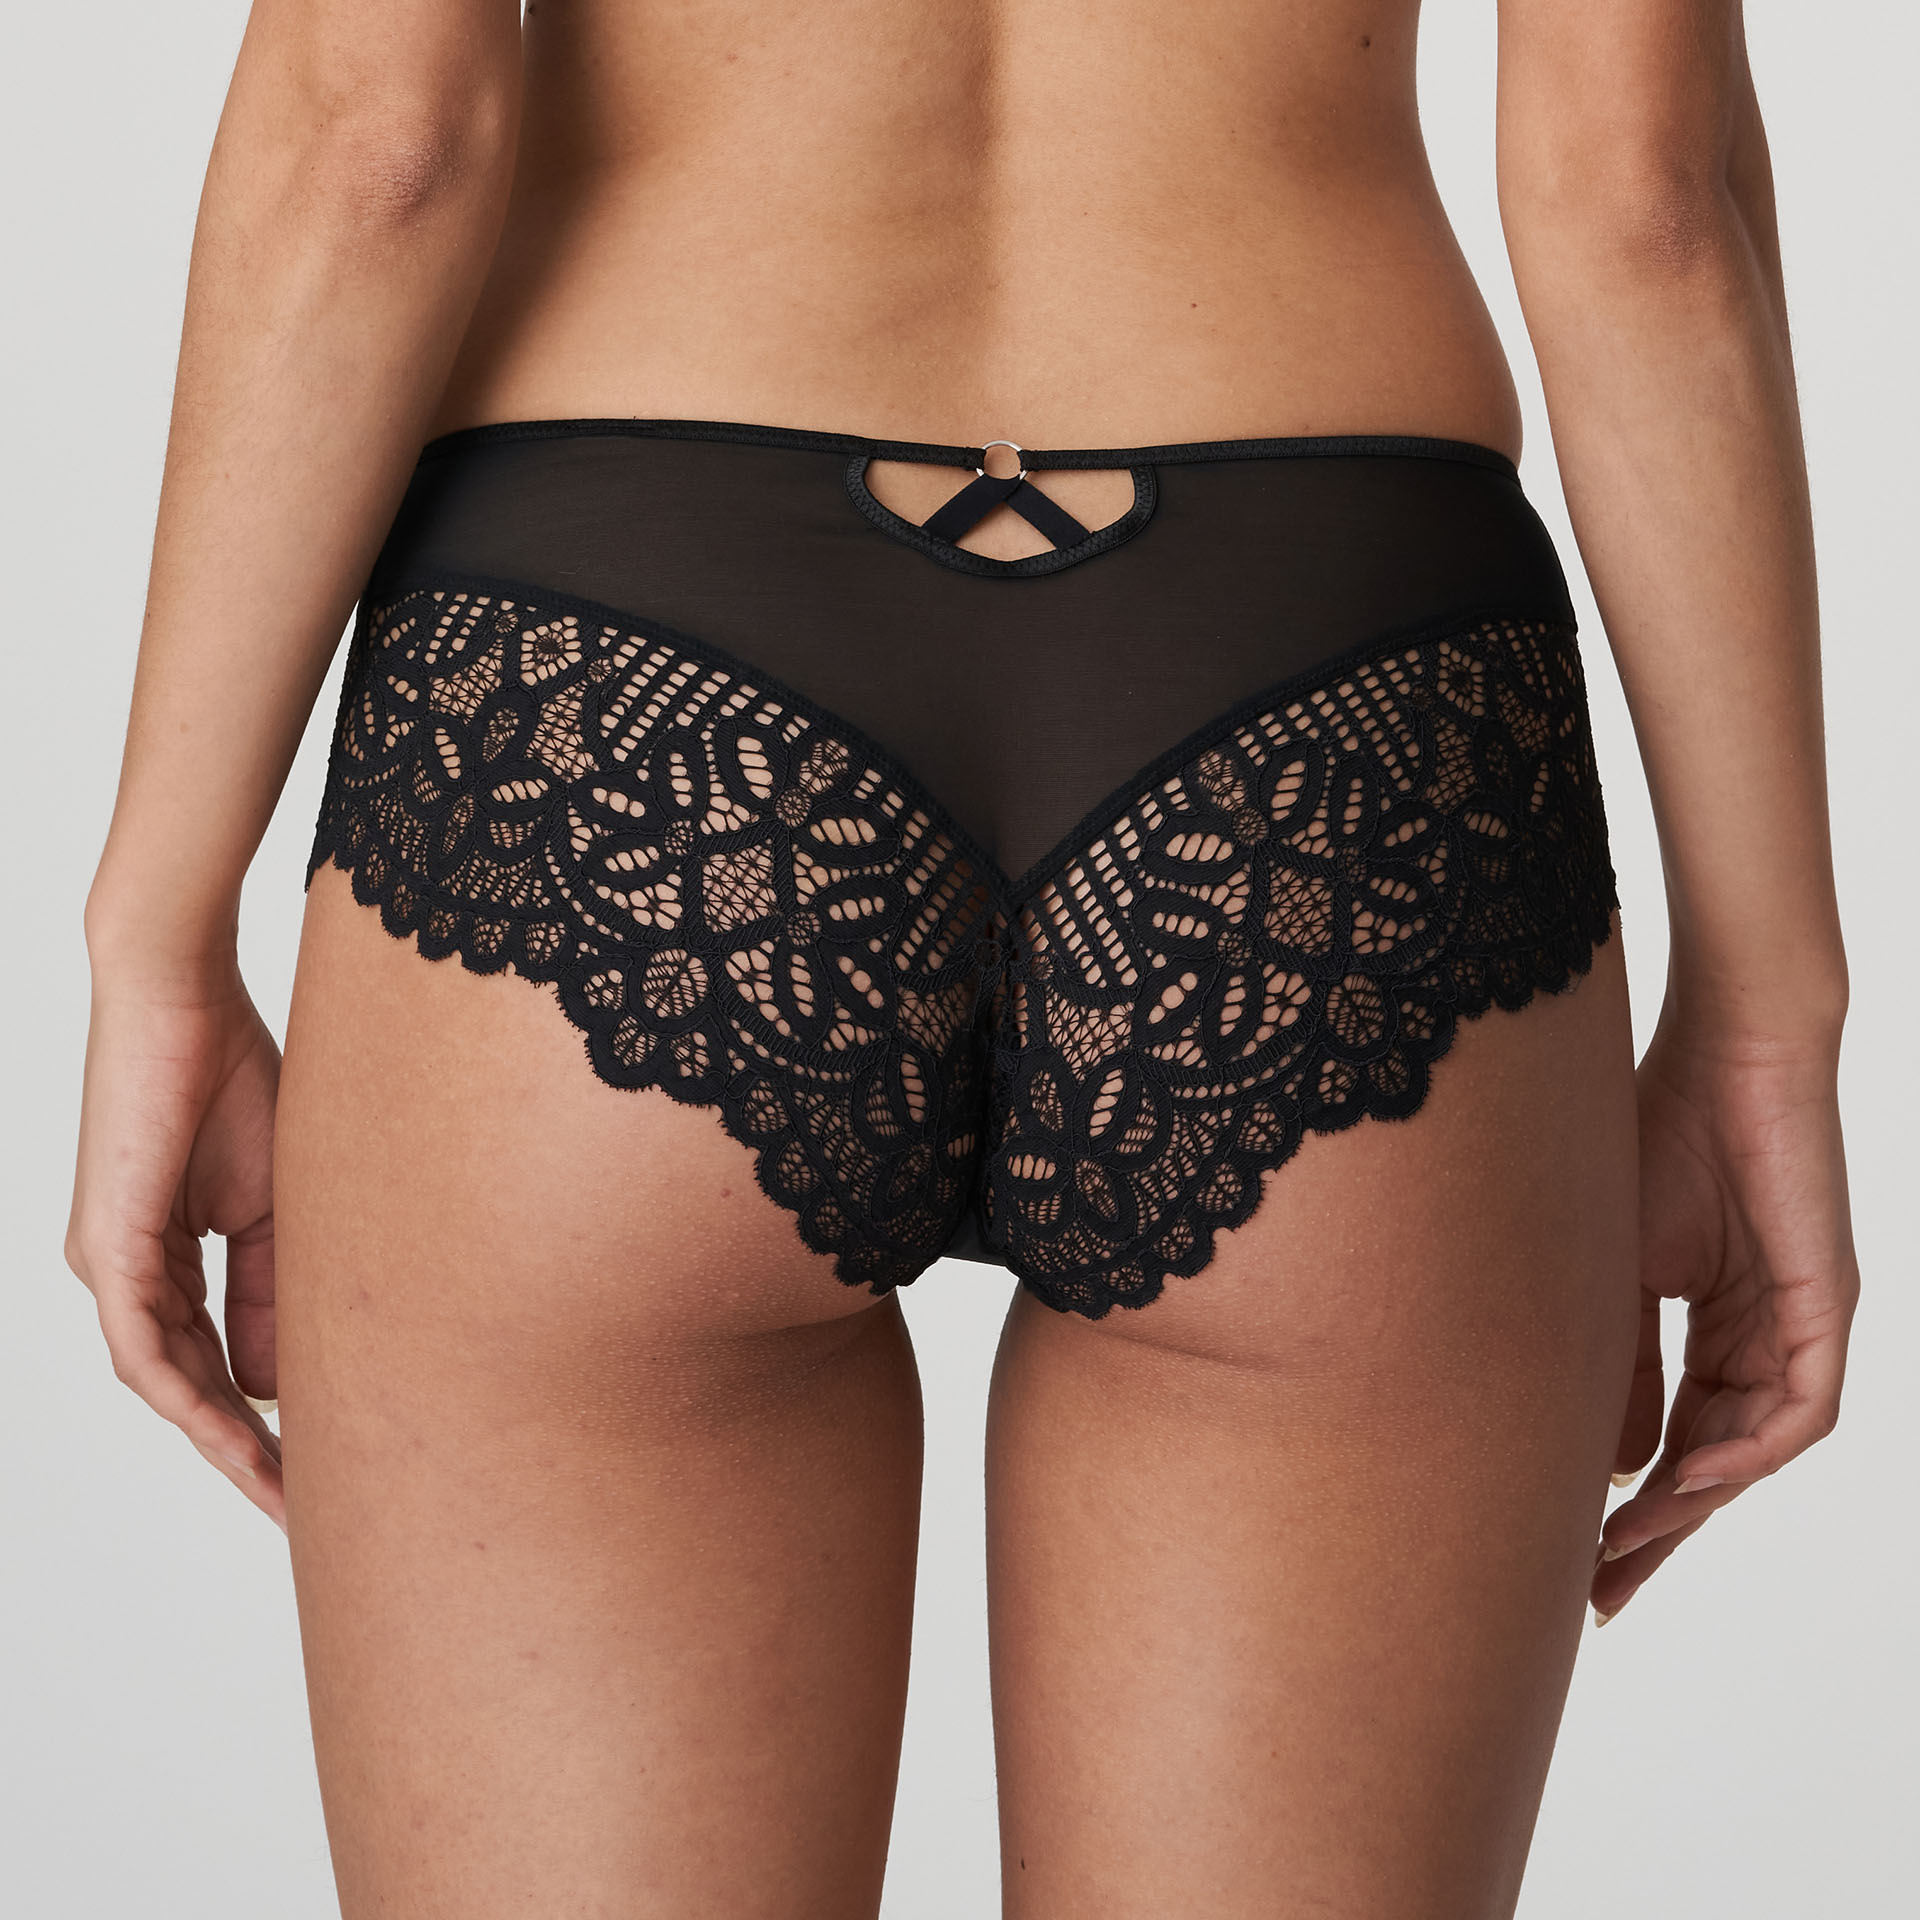 Prima Donna First Night Hotpants 0541882 - Briefs Black / 10 / S  Available at Illusions Lingerie